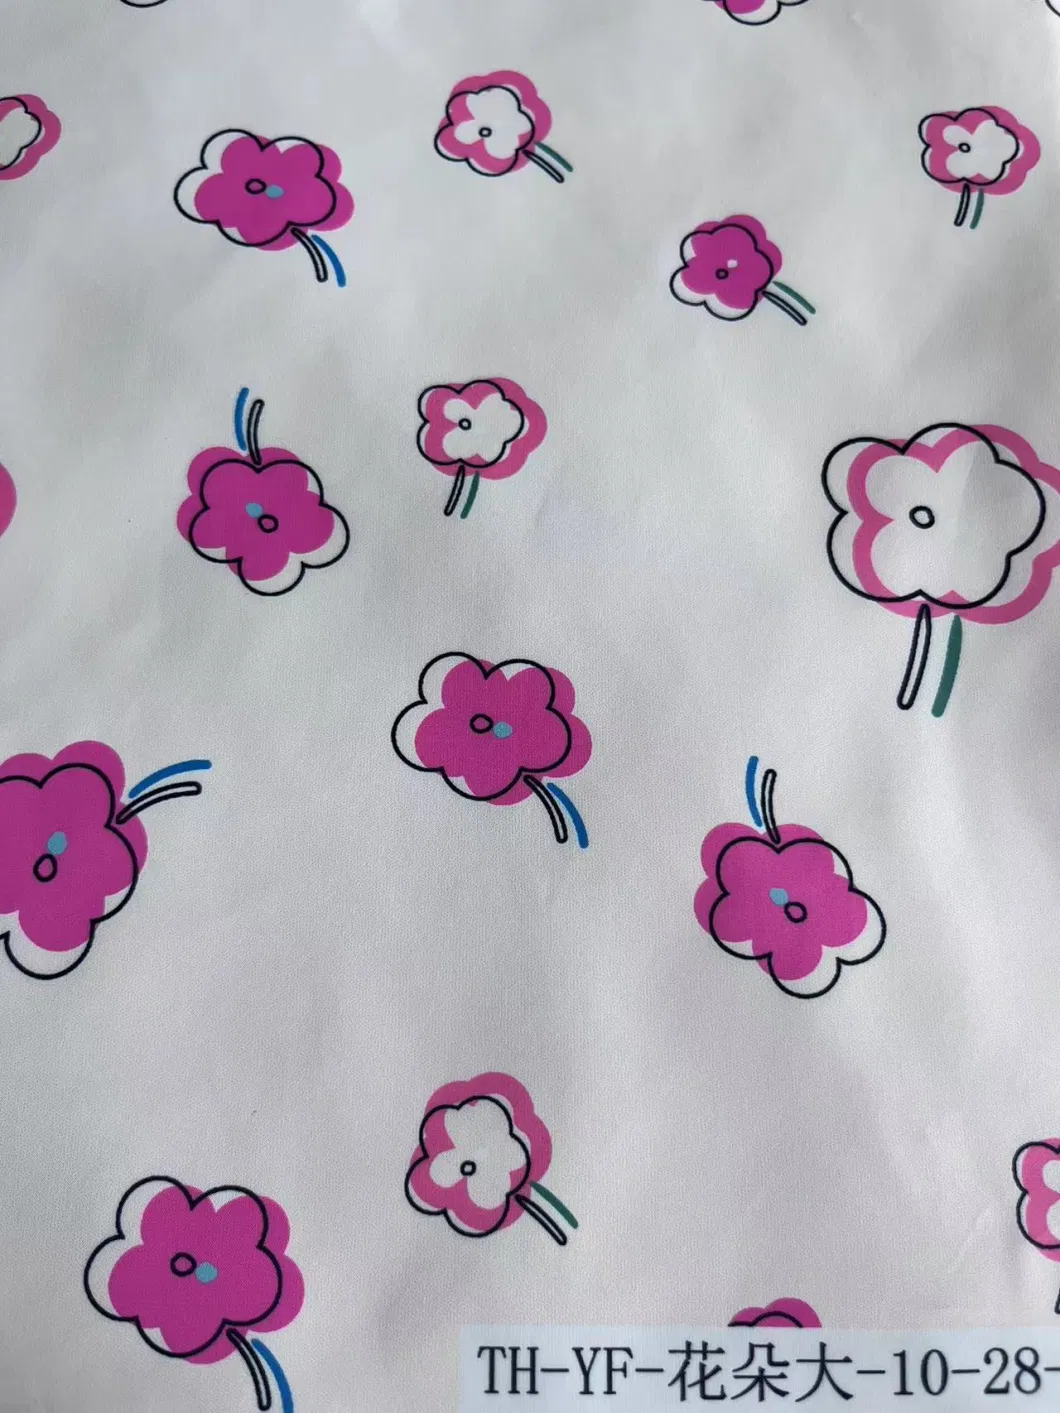 The Double Image Flowers Digital Printed Polyester Fabric for Kids